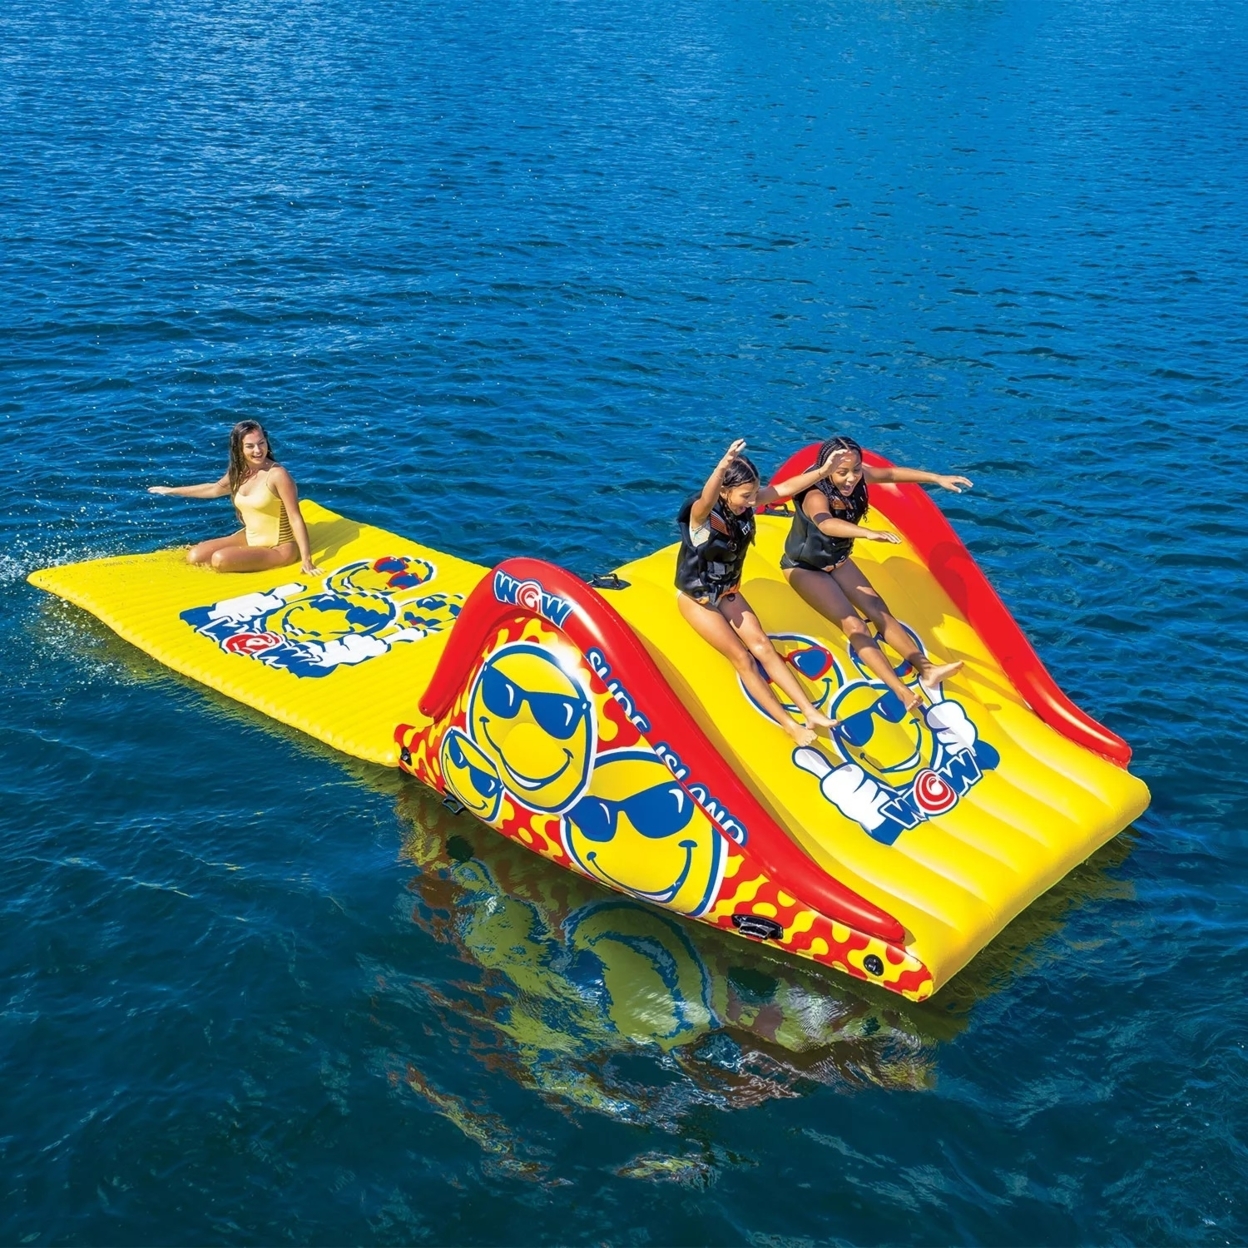 WOW Sports Floating Island Slide and Water Walkway Combo, Red - image 4 of 5